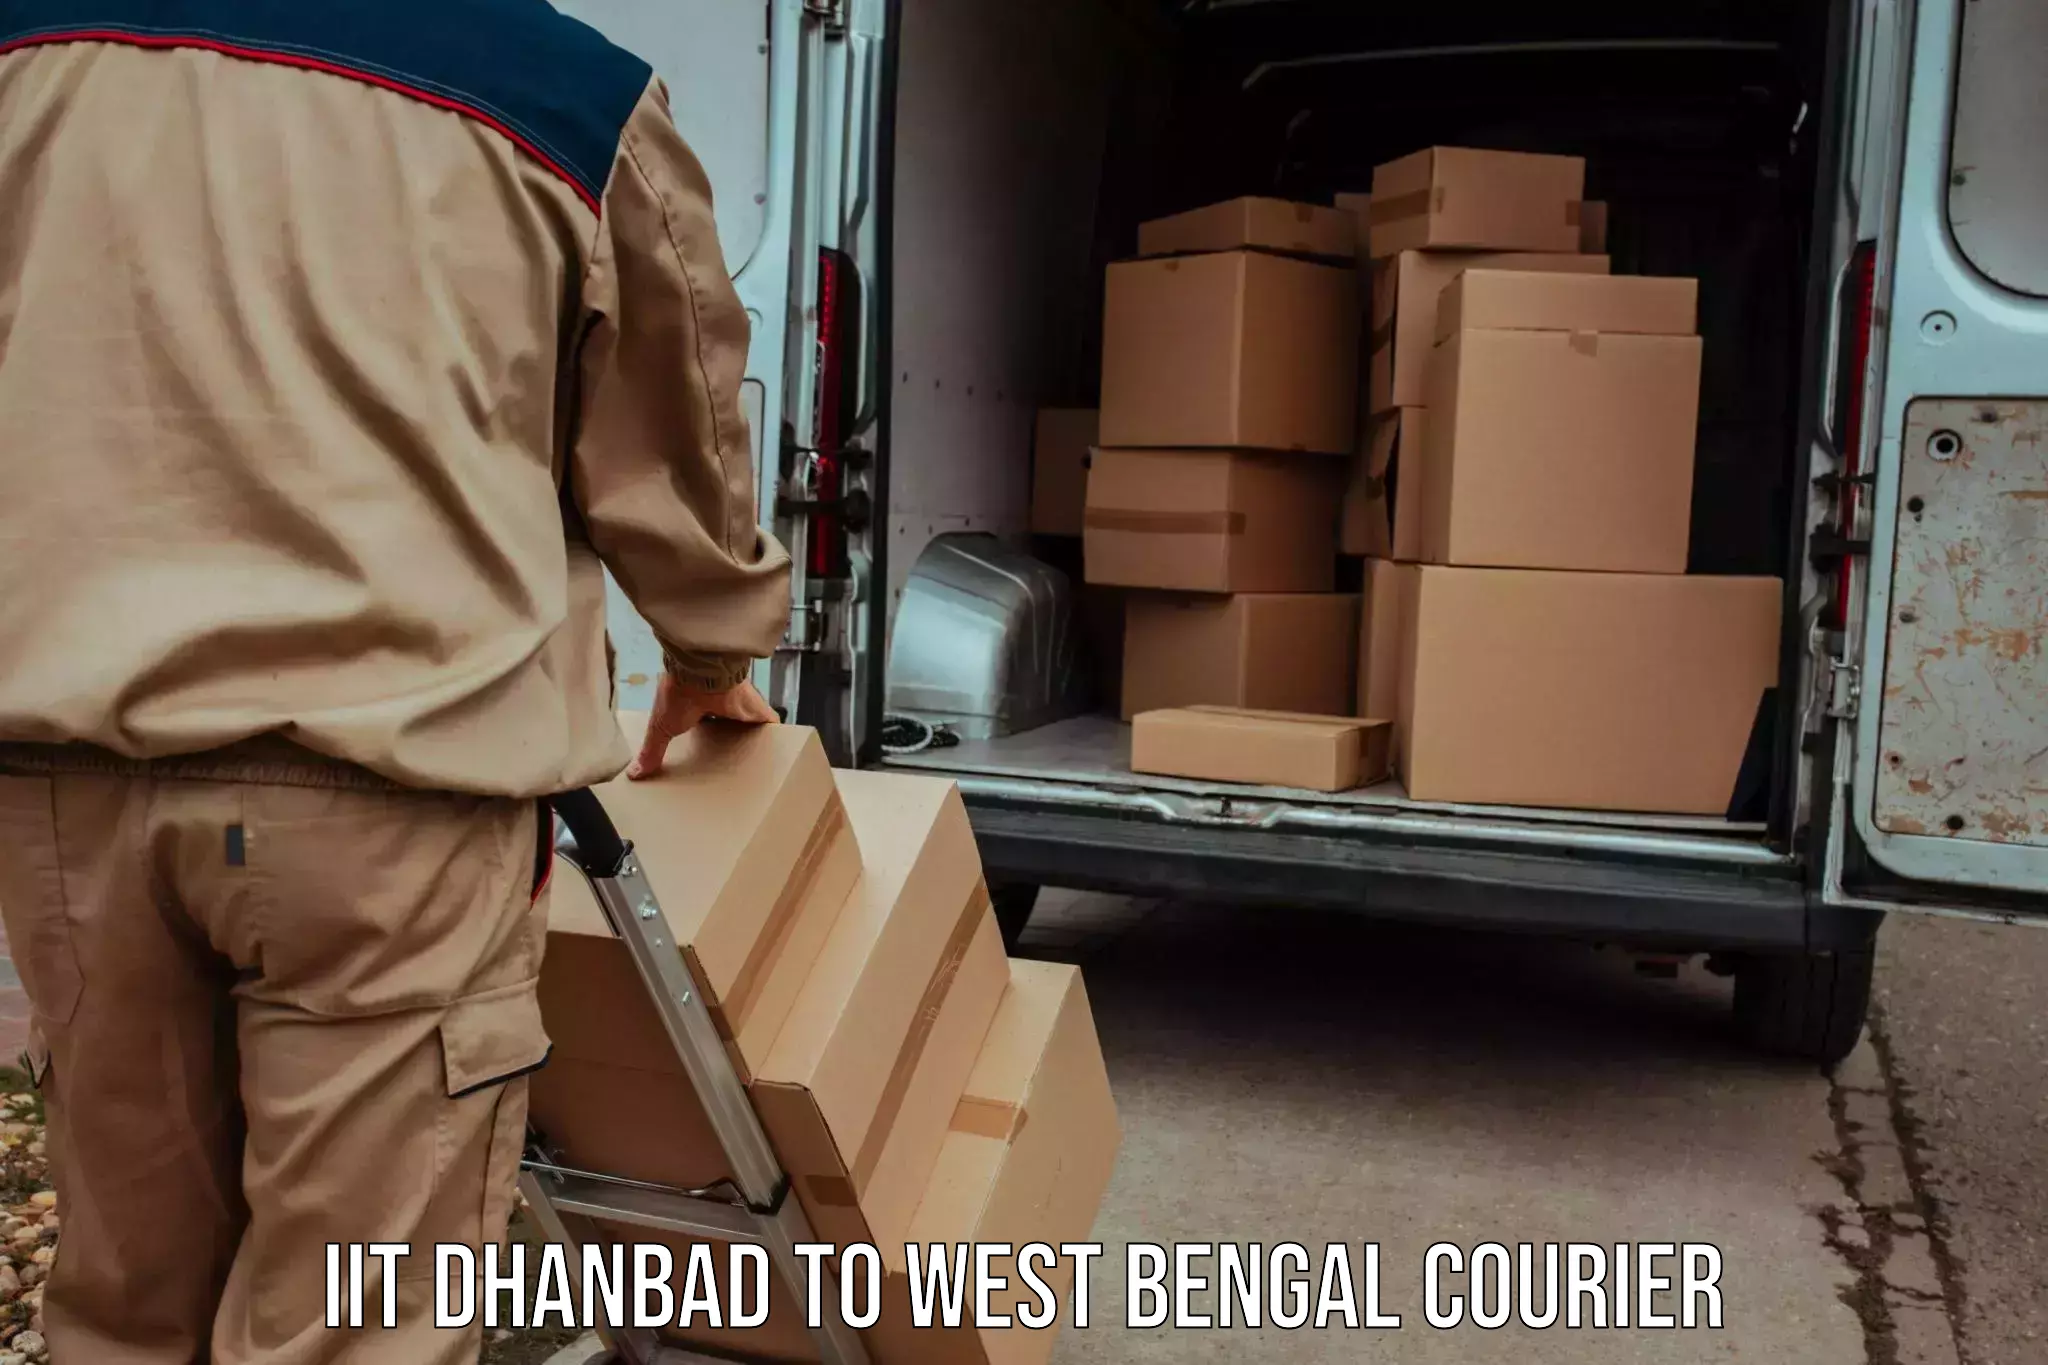 Multi-national courier services IIT Dhanbad to Sonada